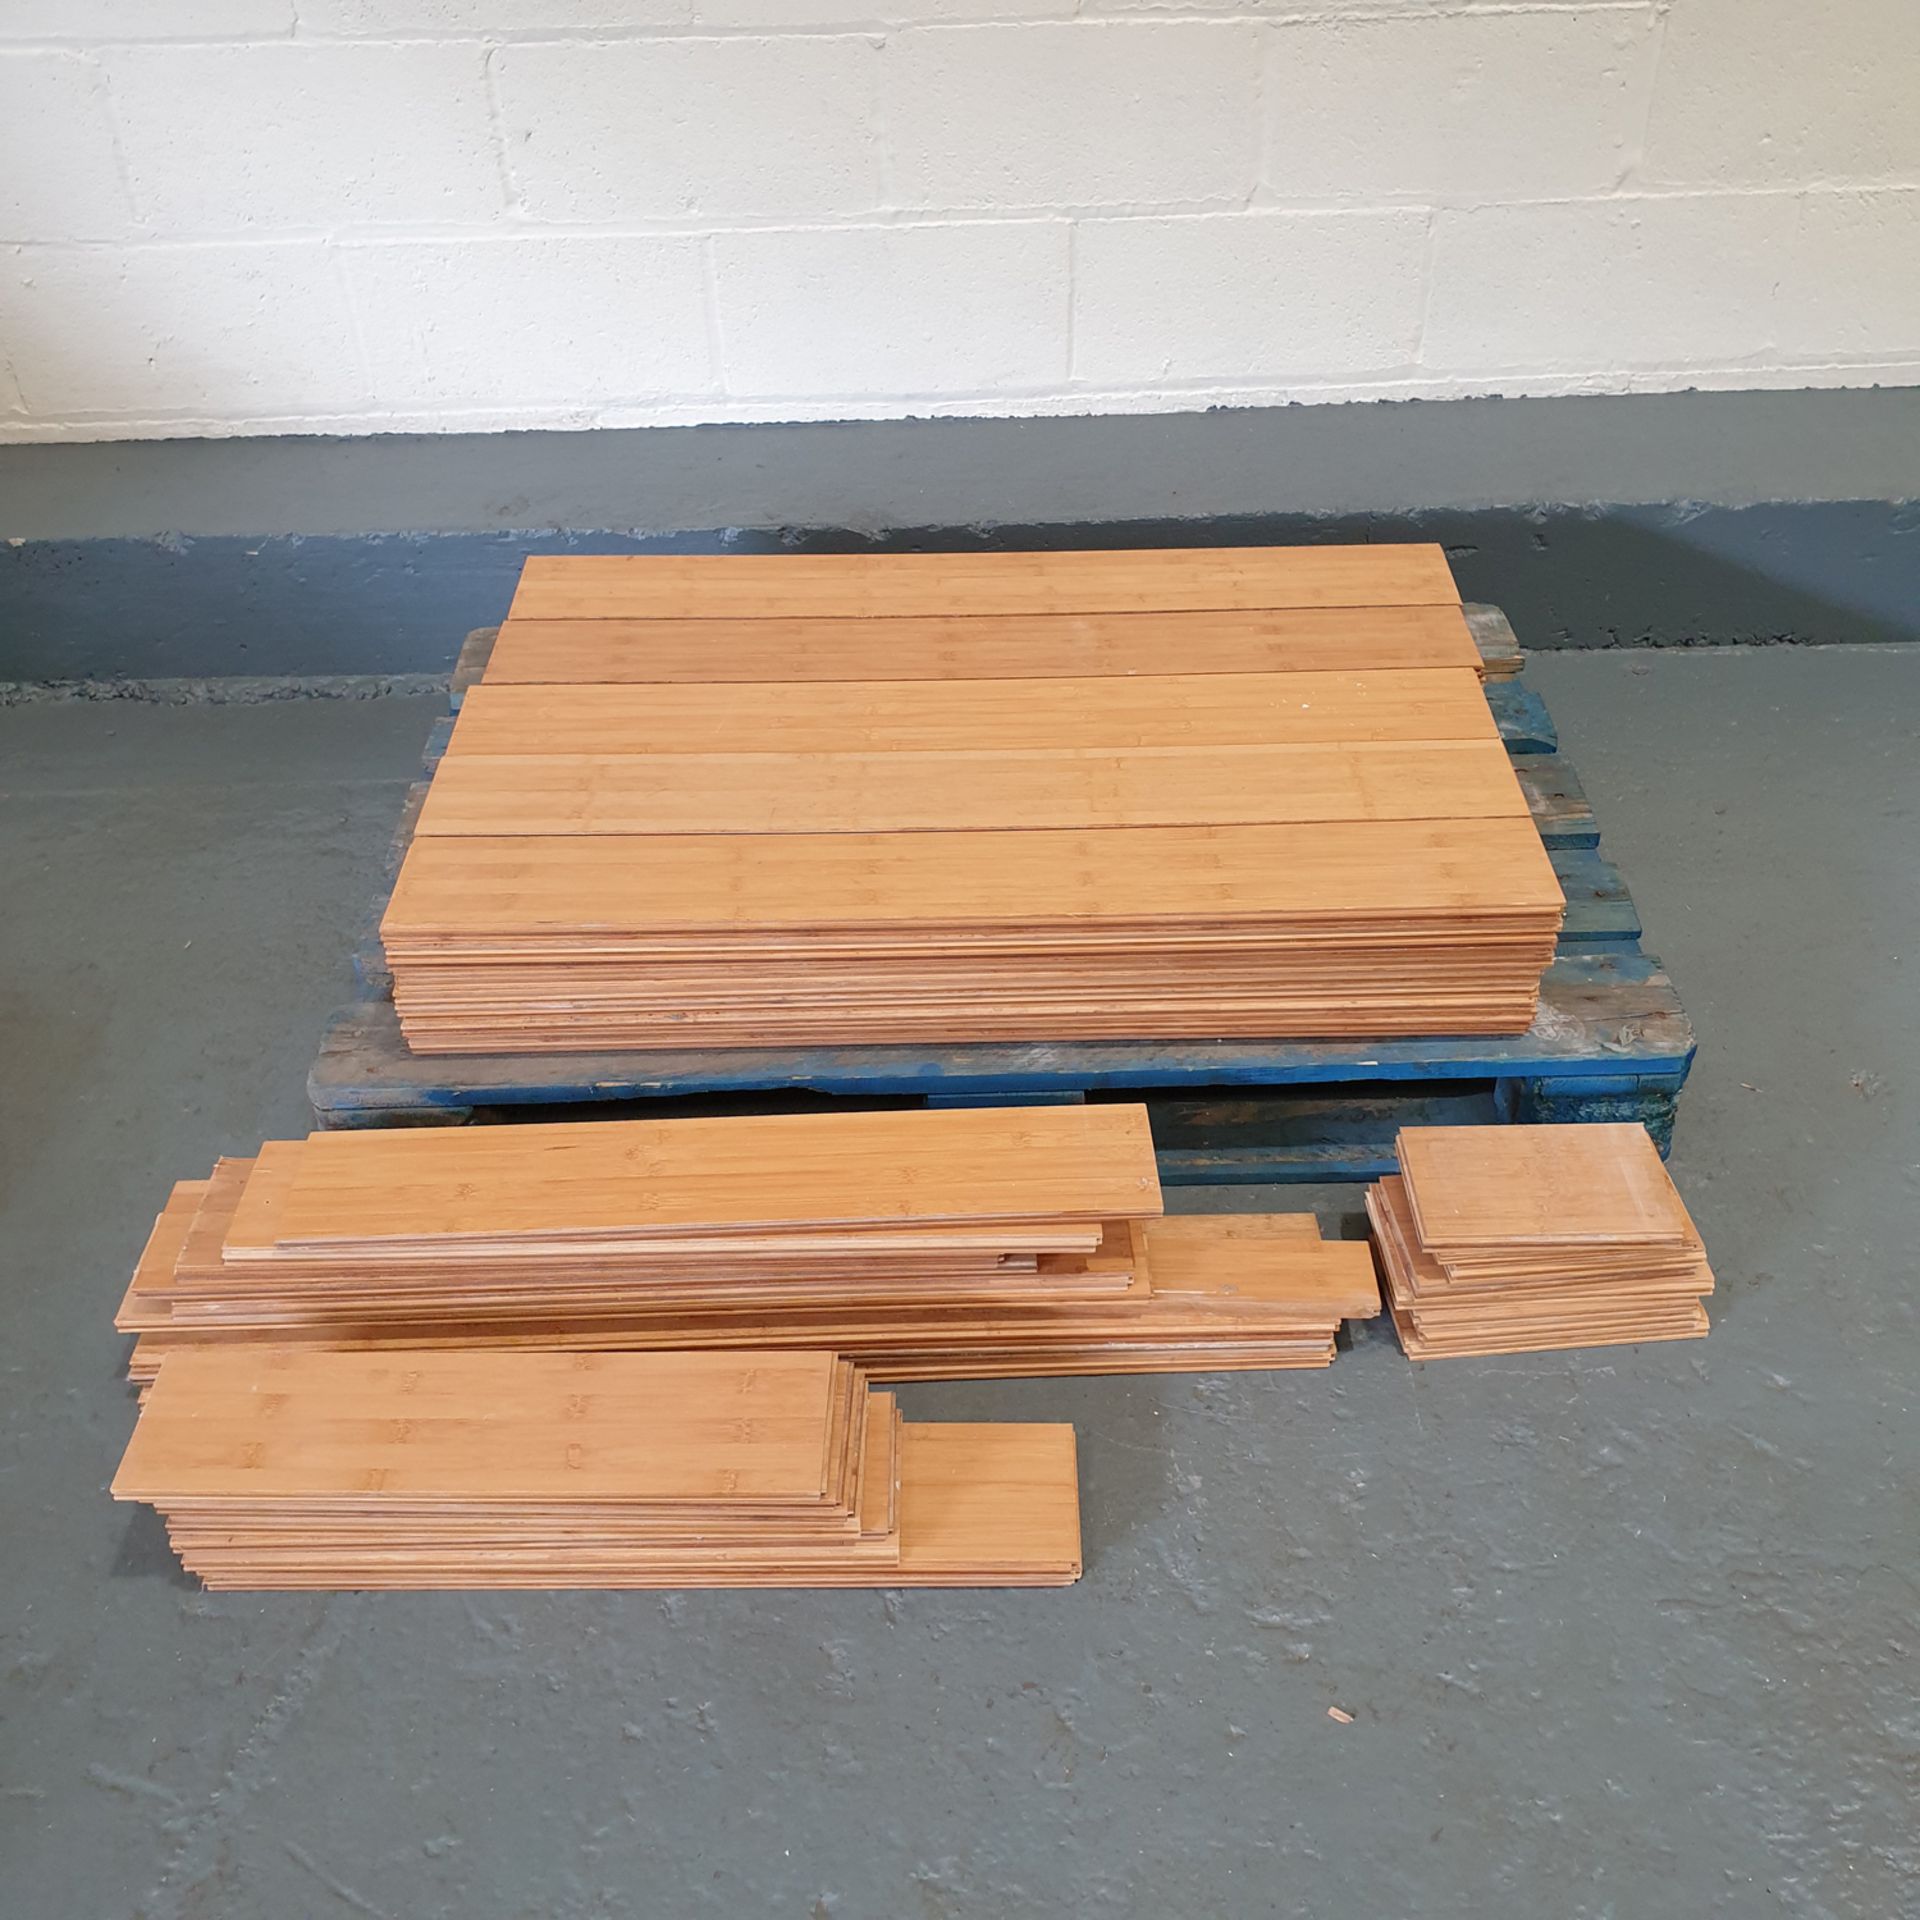 Hard Wood Flooring (Ply) With Additional Off Cuts. Approx 5 Square Meters.